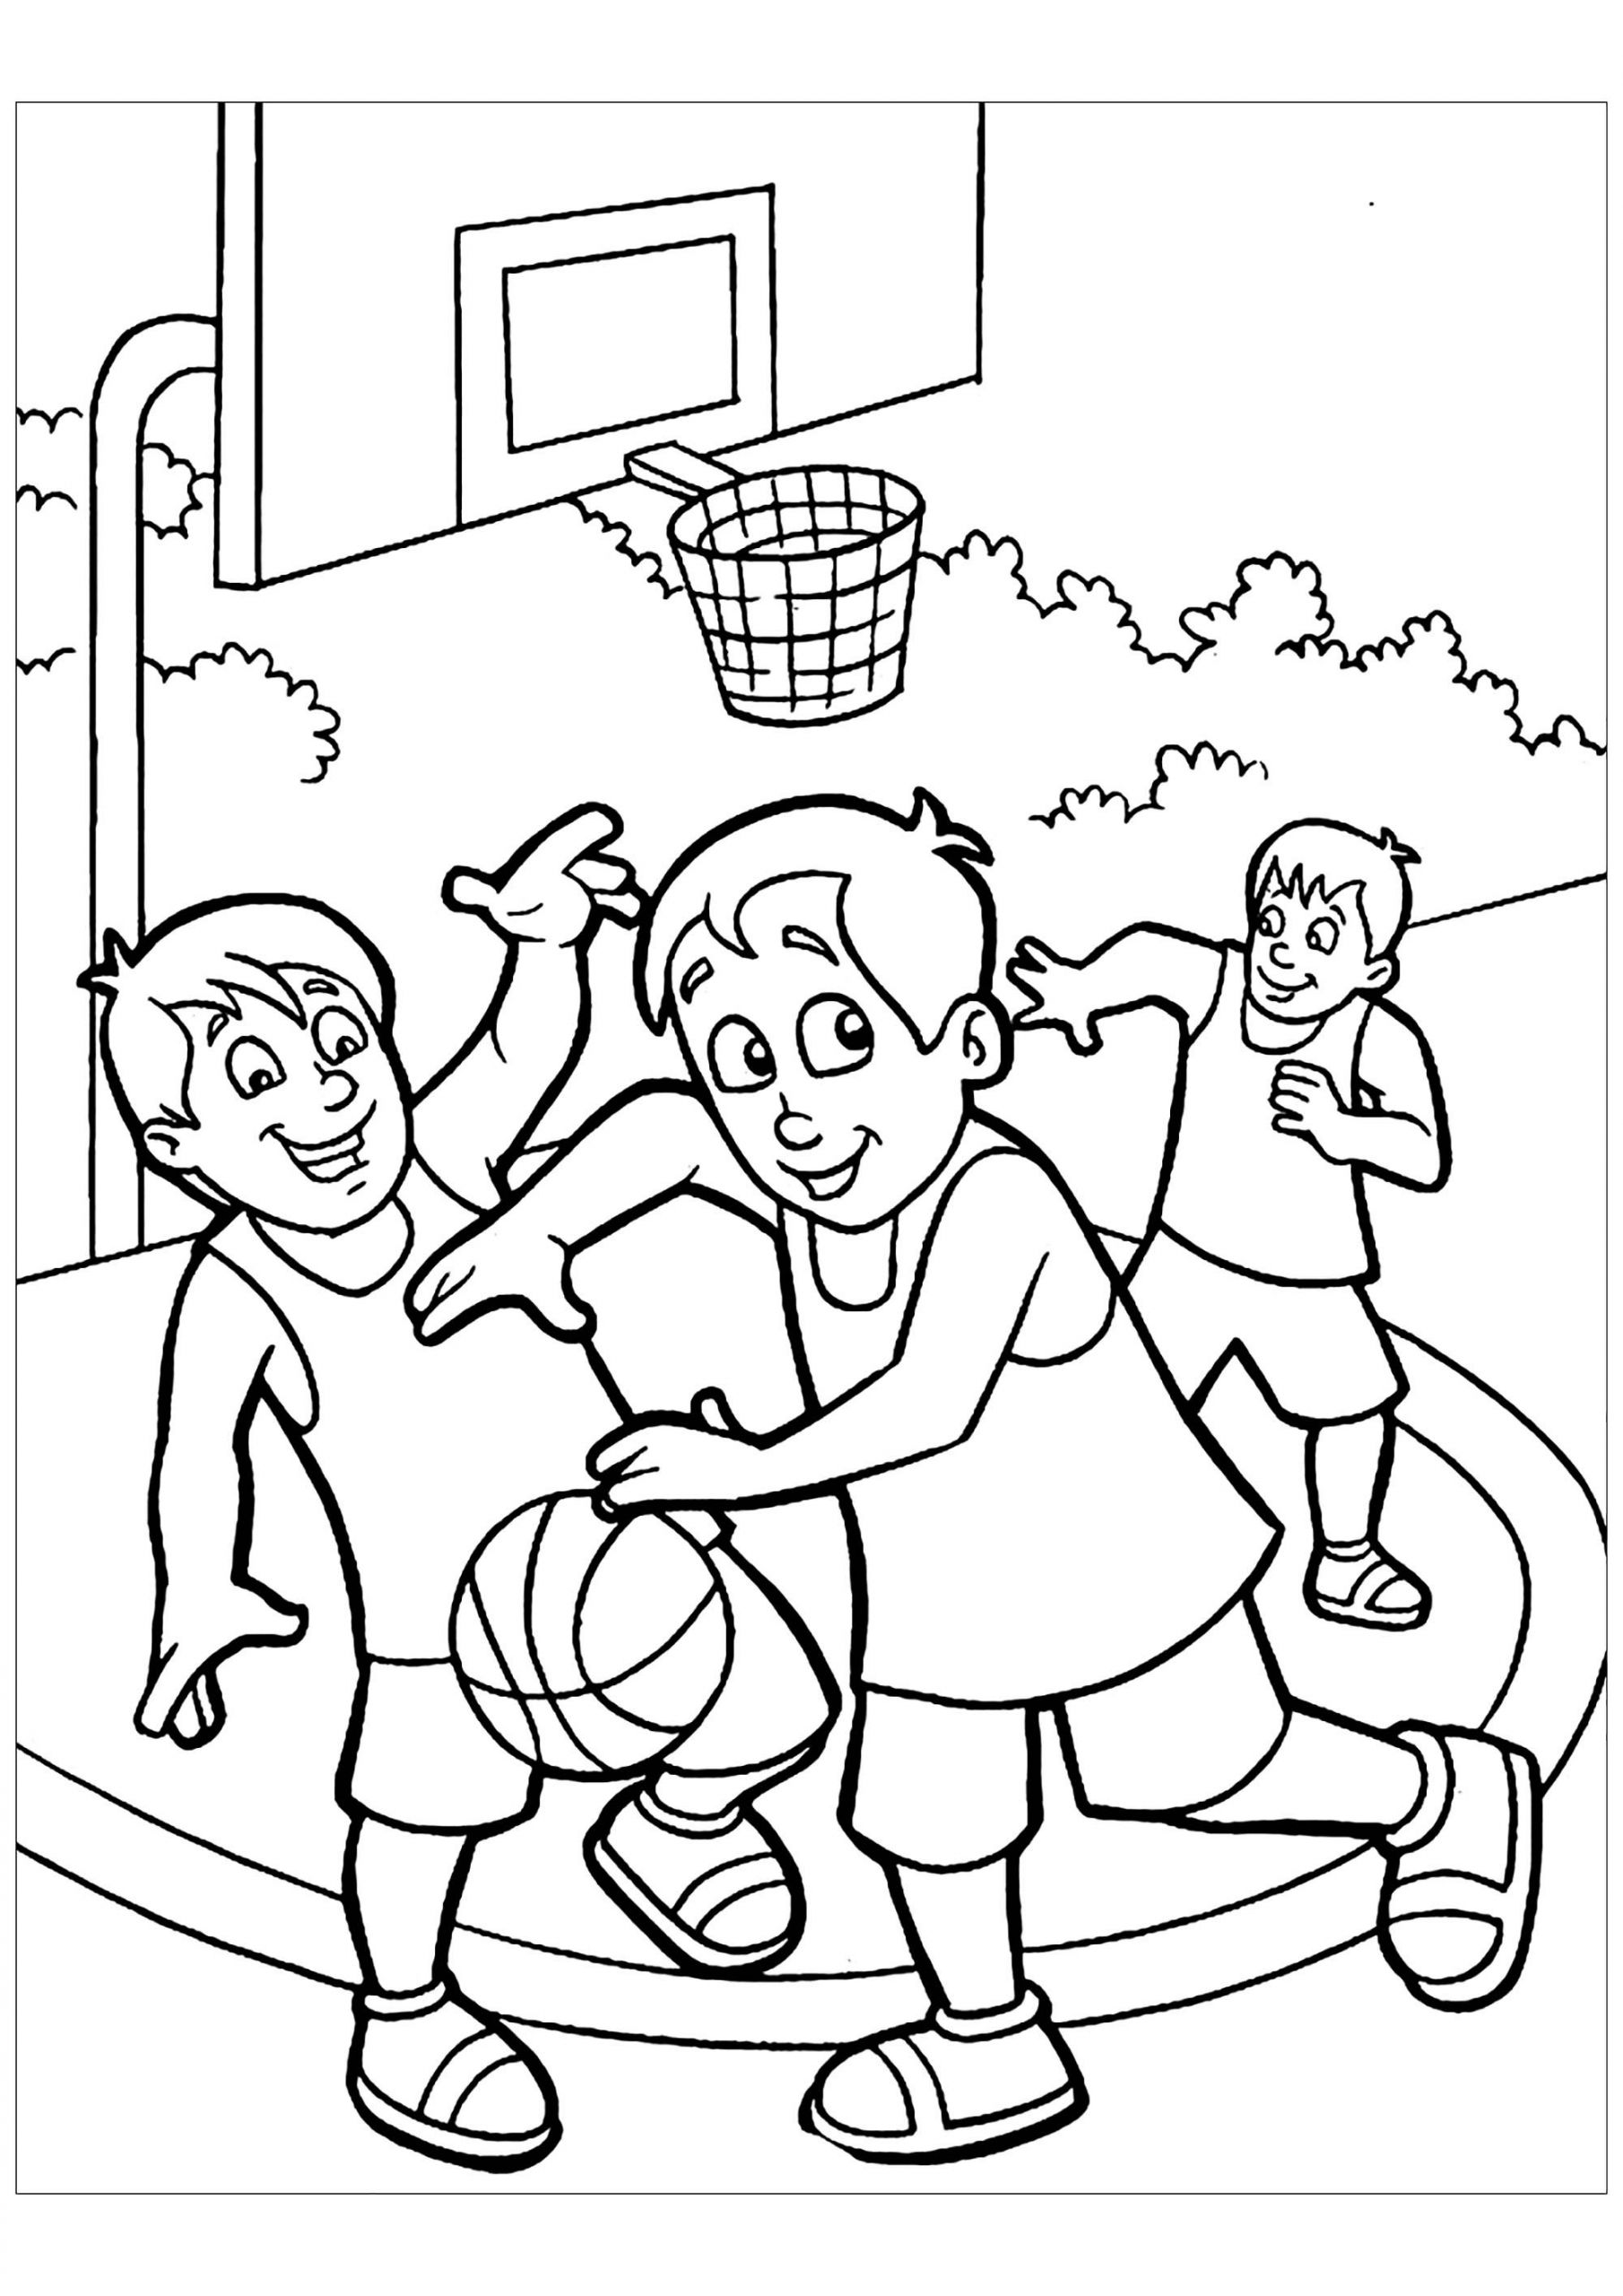 Kids Playing Coloring Pages
 Basketball free to color for kids Basketball Kids